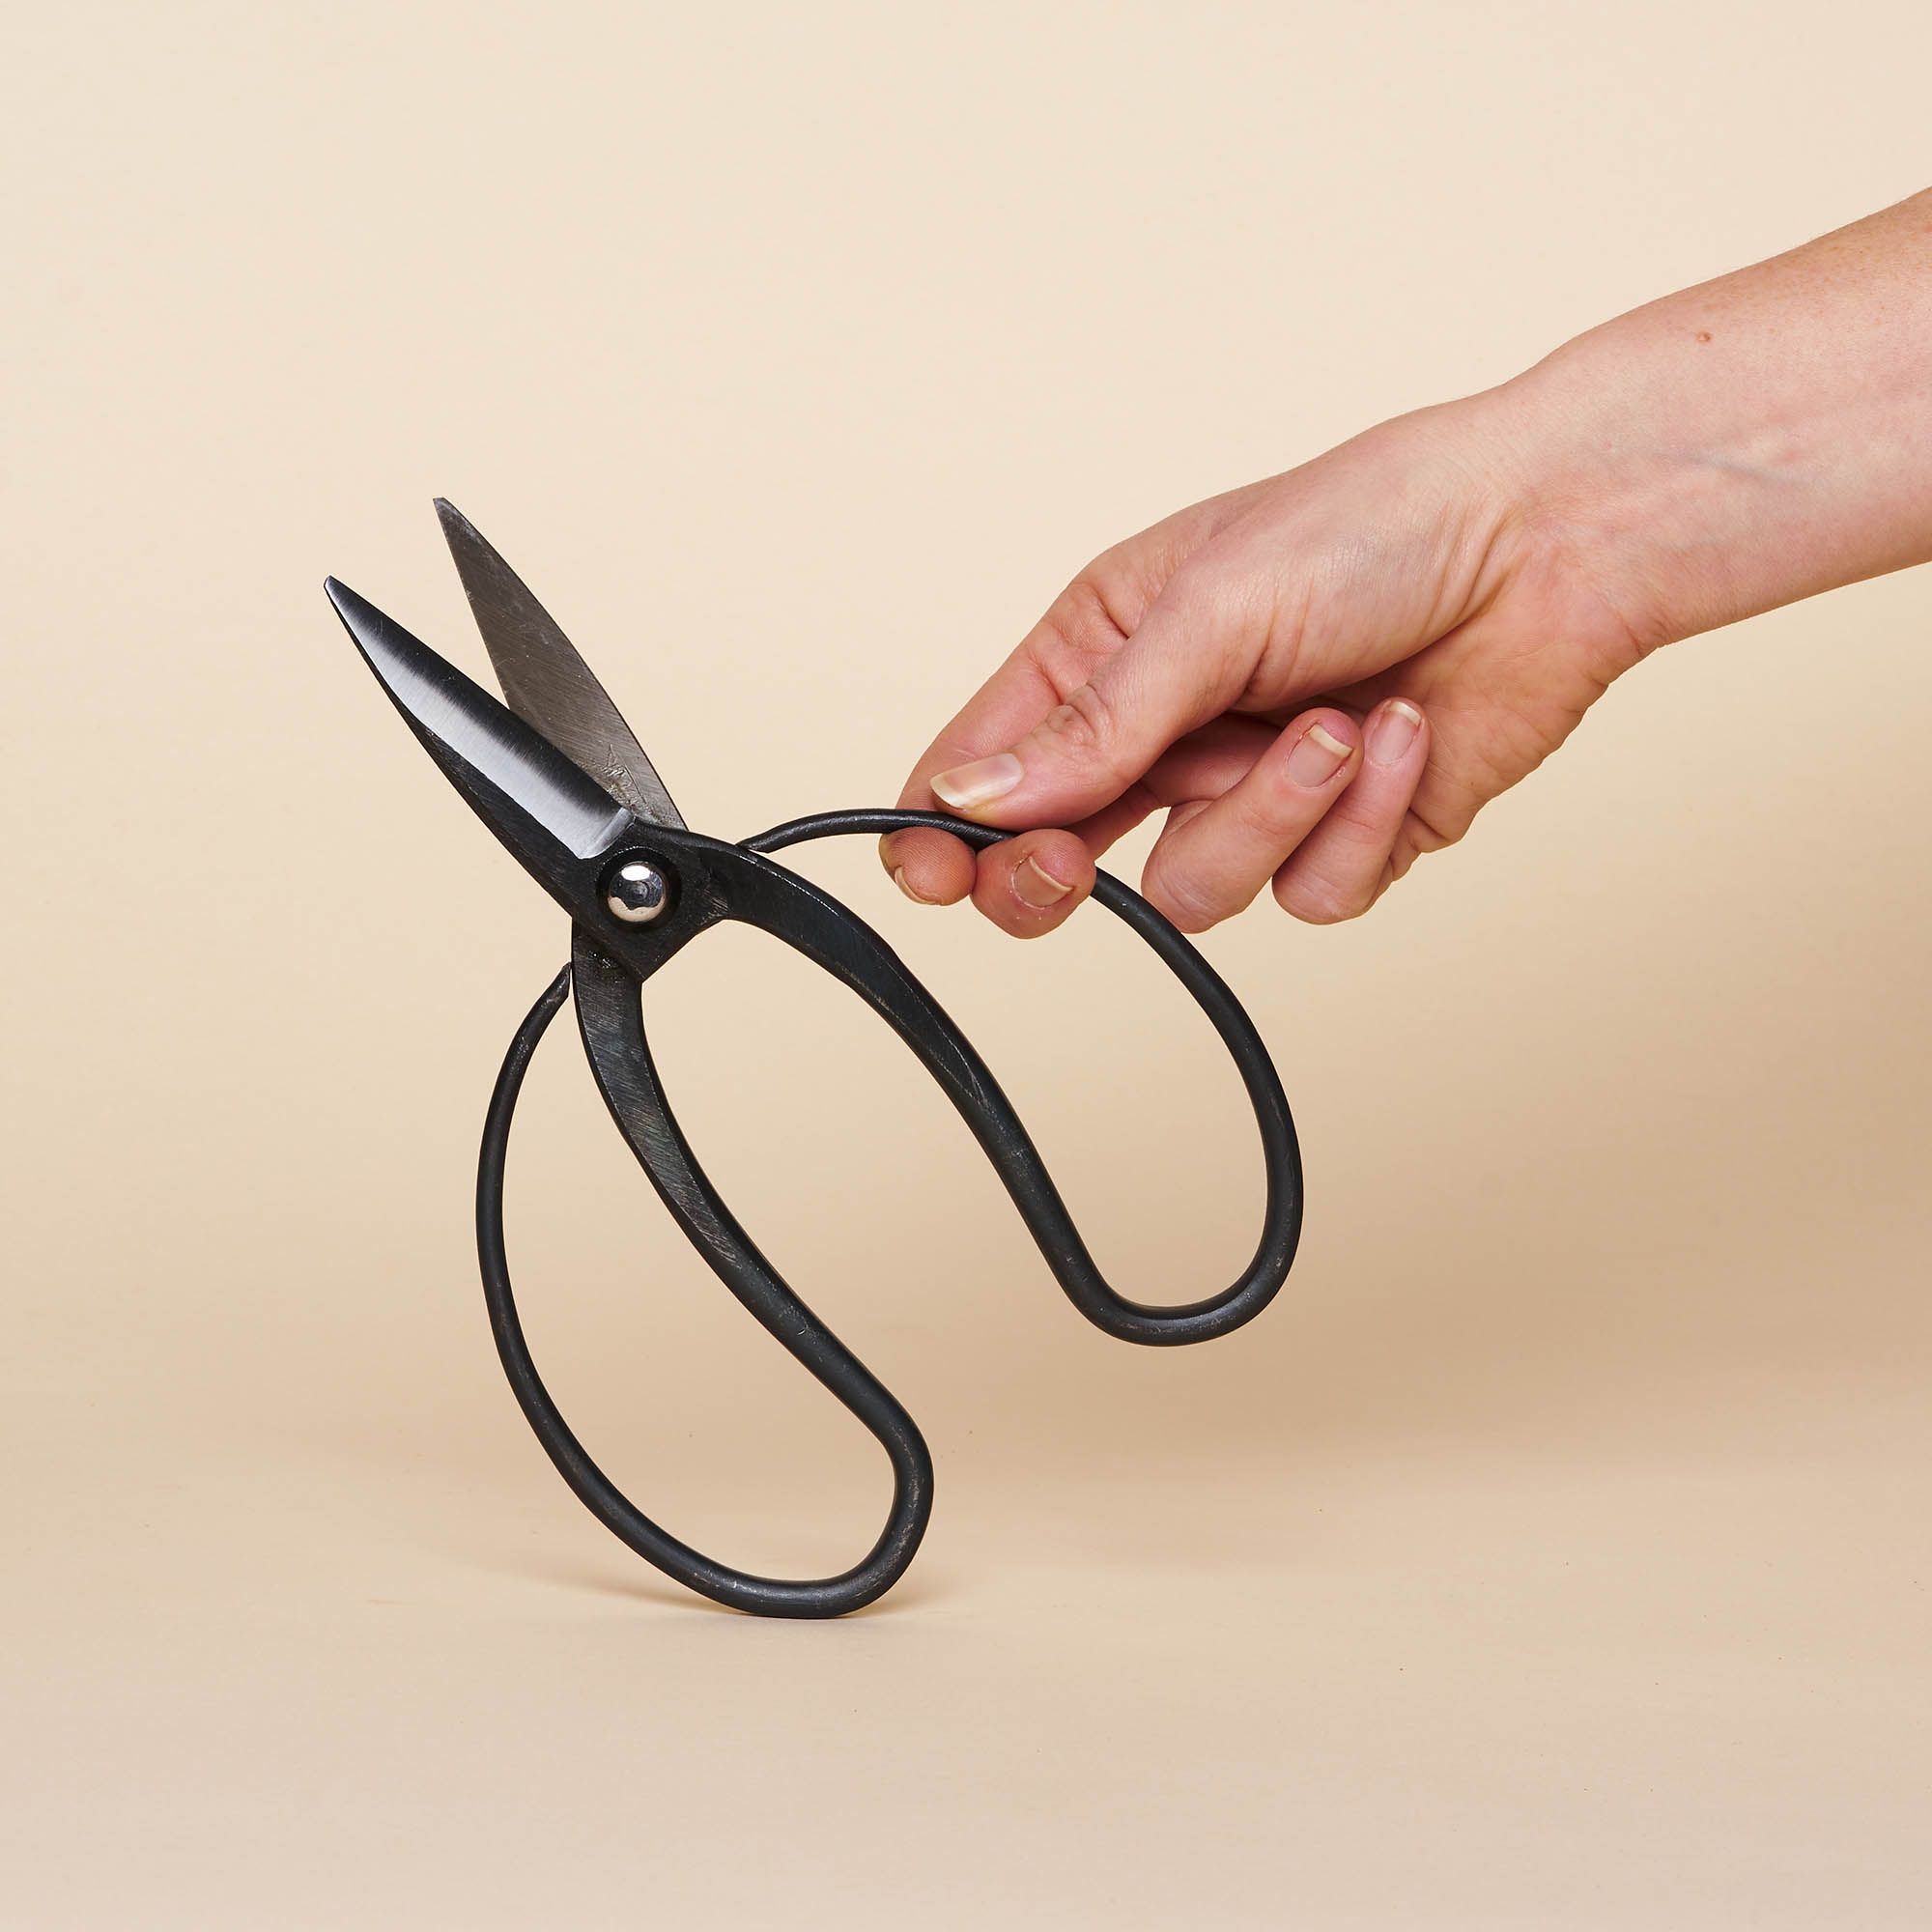 Japanese Gardening Shears, with a black balloon-shaped handle.